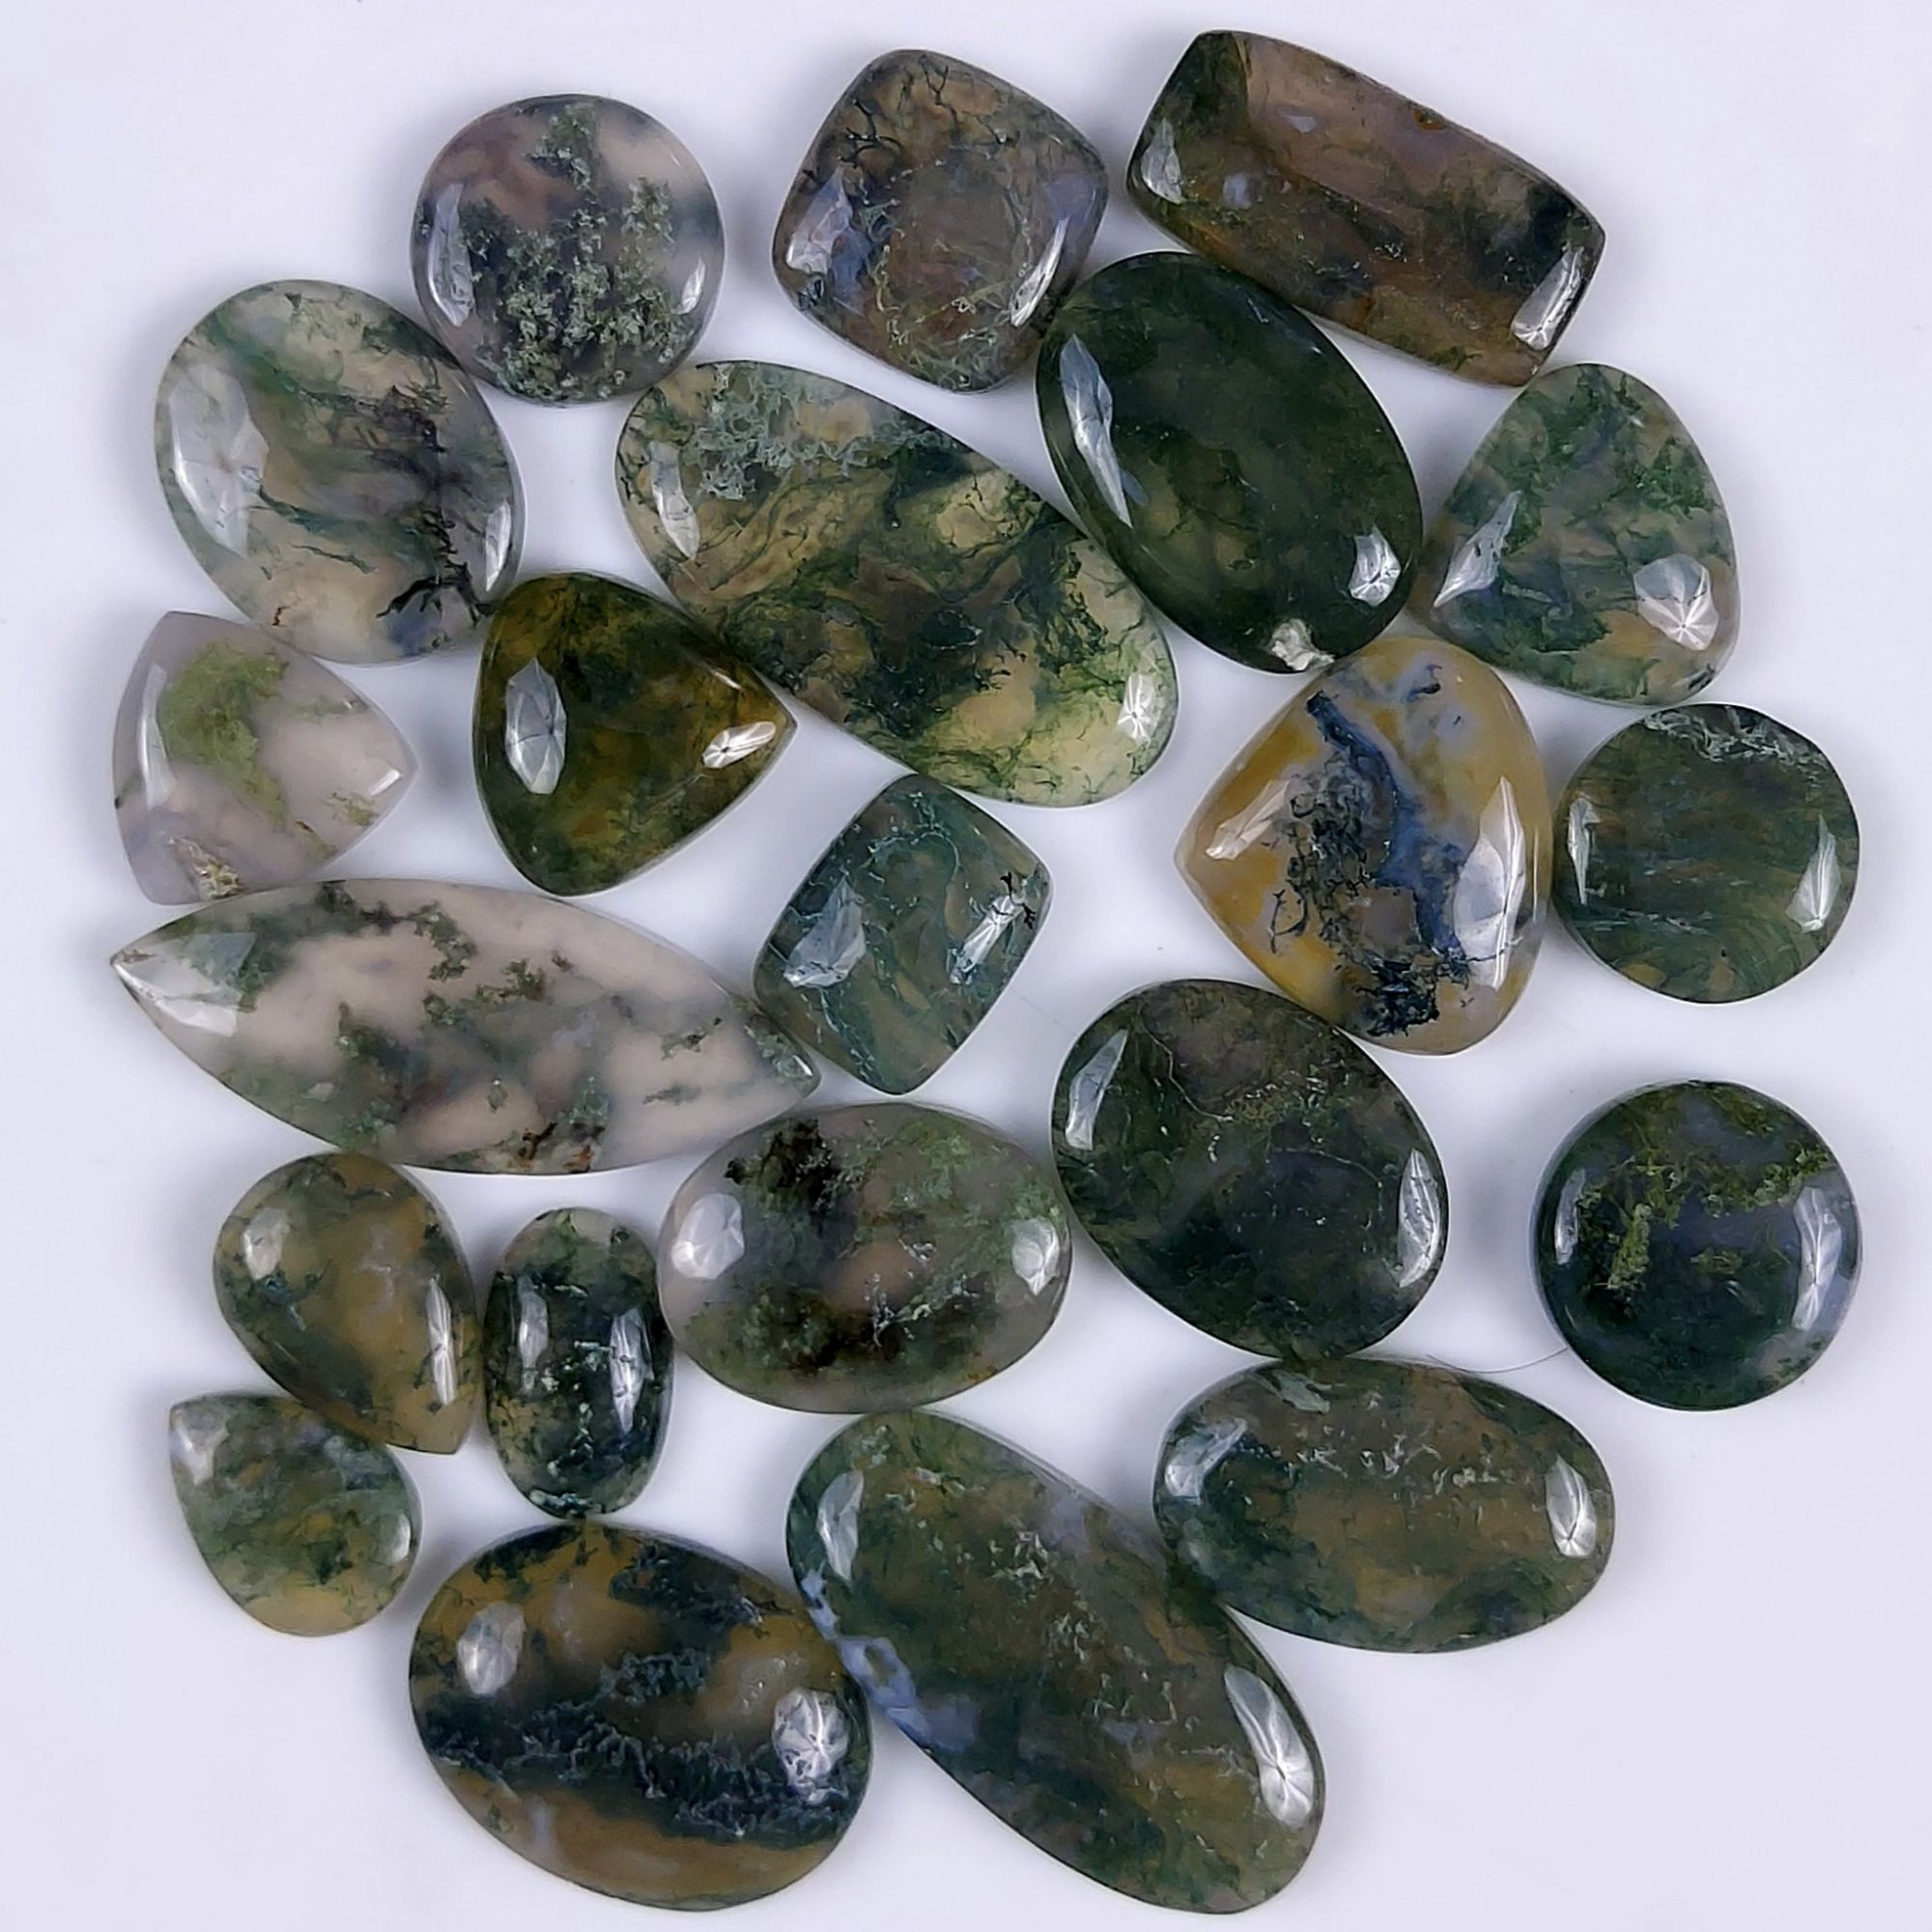 22Pcs 246Cts Natural Green Moss Agate Cabochon Lots Mixed Shapes And Sizes Moss Agate loose gemstone Cabochon Wholesale Lot 27x12 11x7mm#G-357